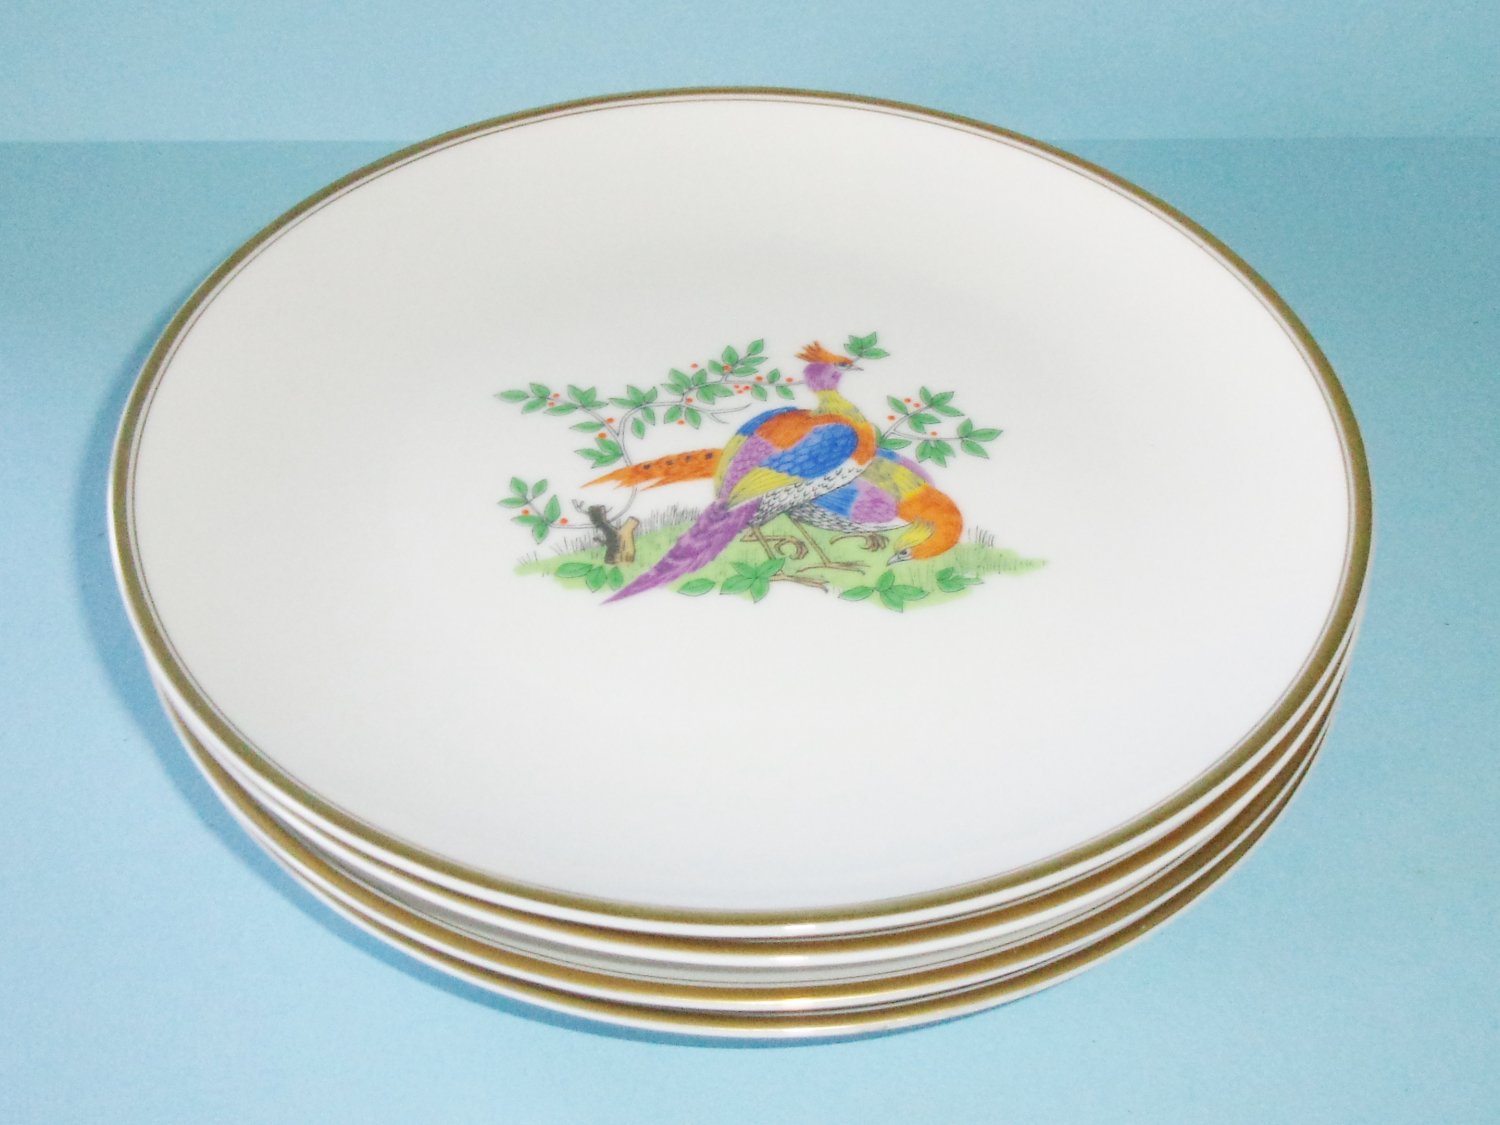 Fitz and Floyd Colorful Bird Plates Set of 4 Salad Plates With Gold Trim